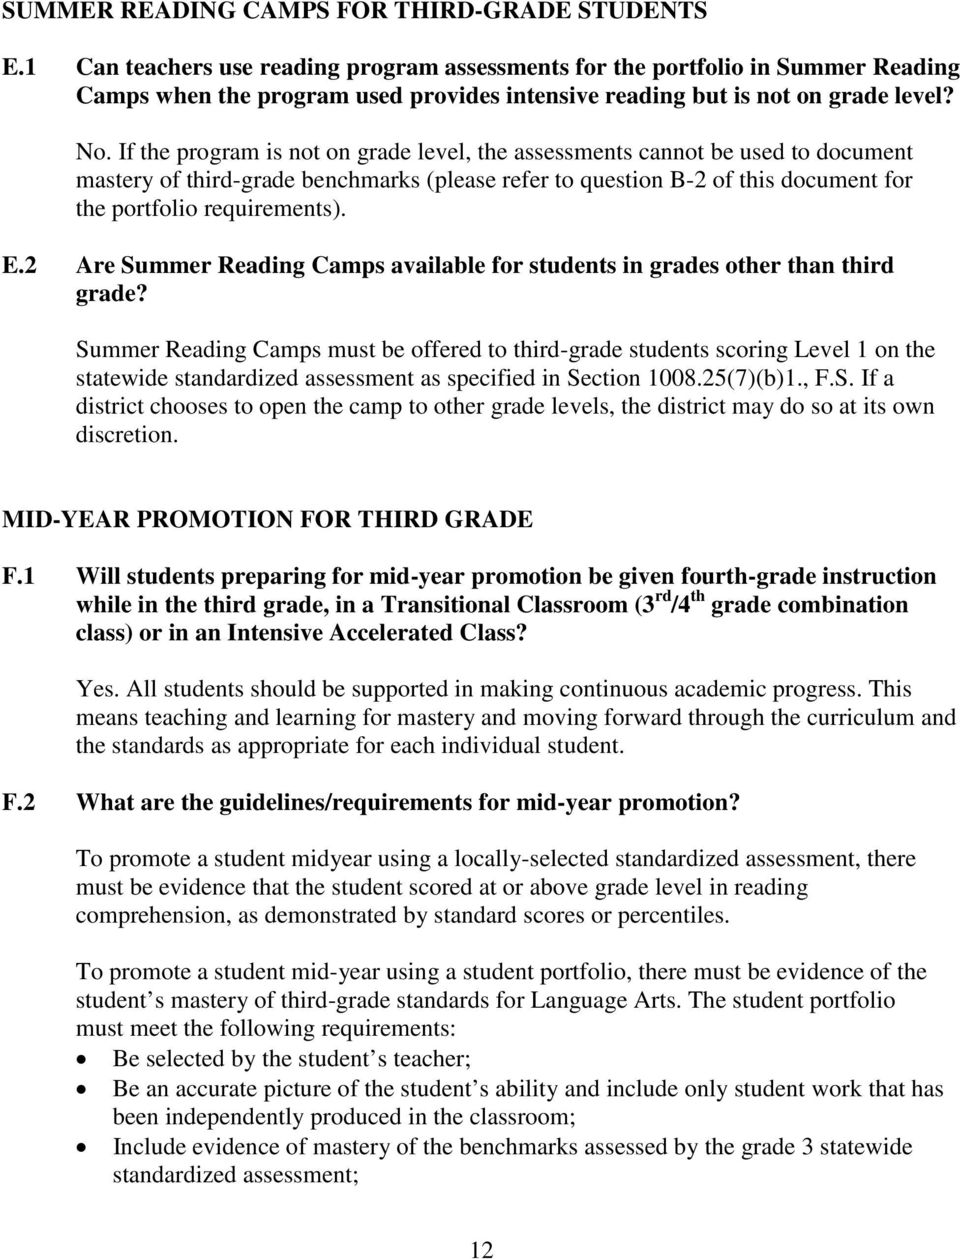 If the program is not on grade level, the assessments cannot be used to document mastery of third-grade benchmarks (please refer to question B-2 of this document for the portfolio requirements). E.